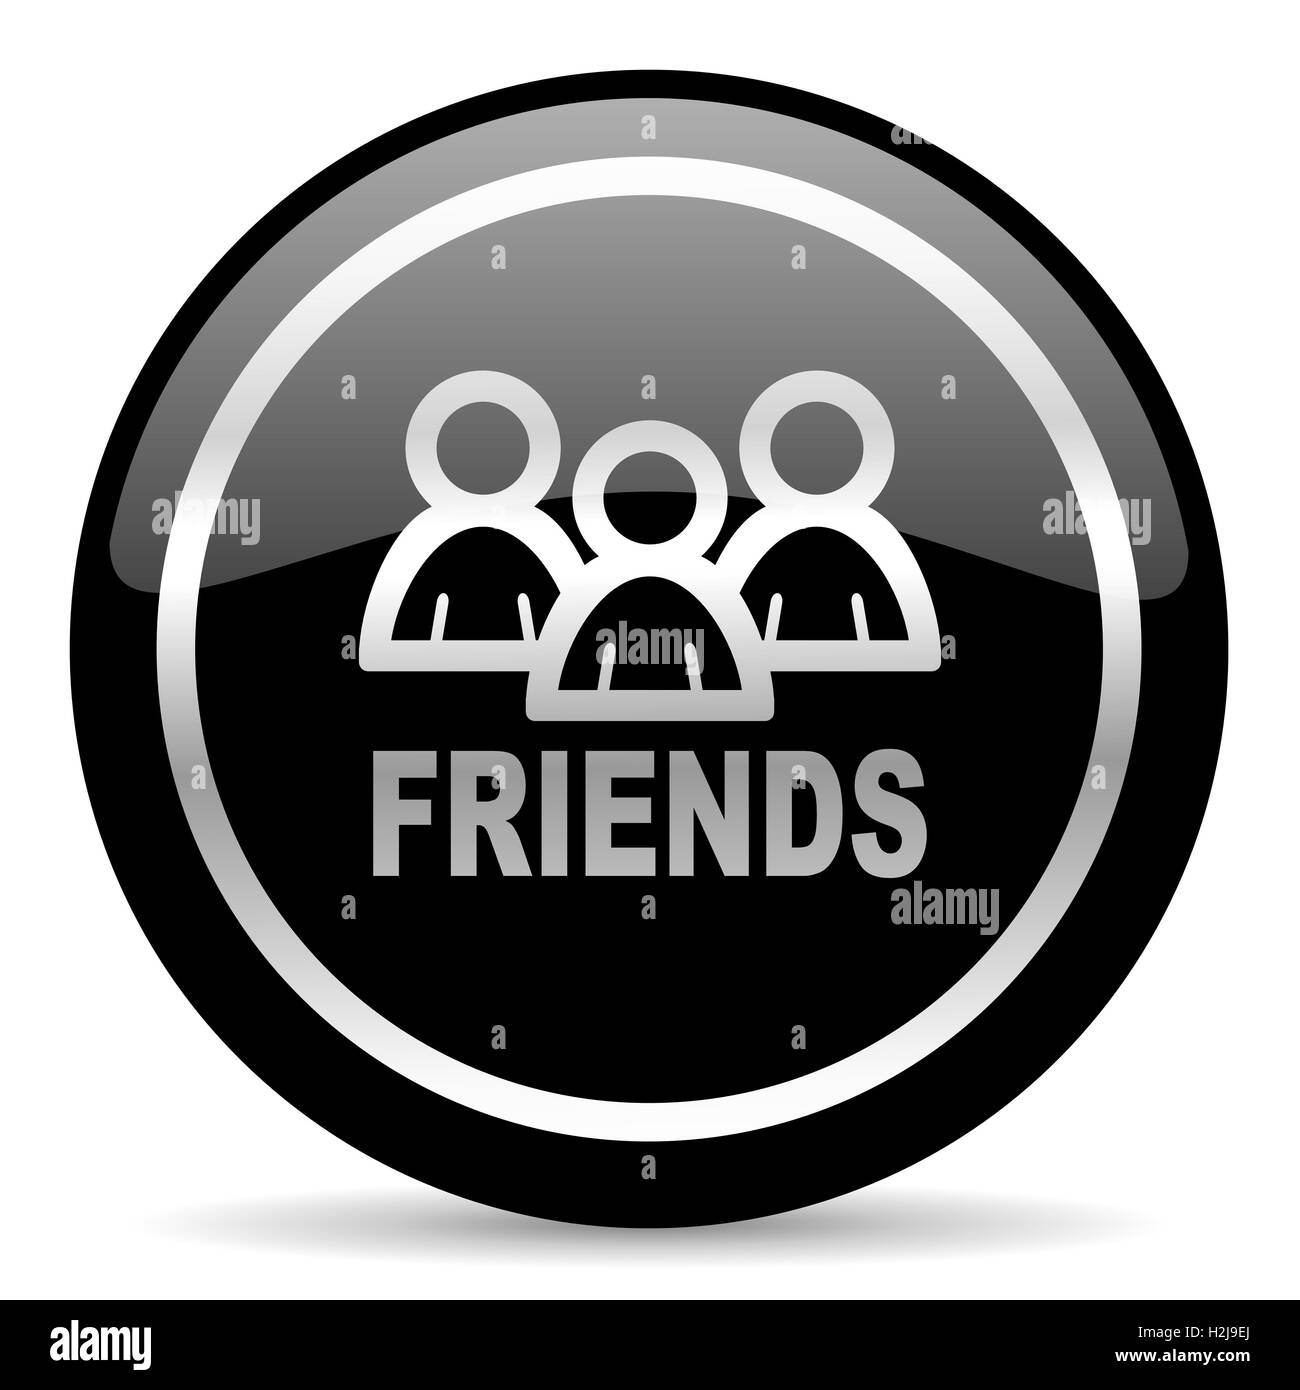 Friends icon Black and White Stock Photos & Images - Alamy